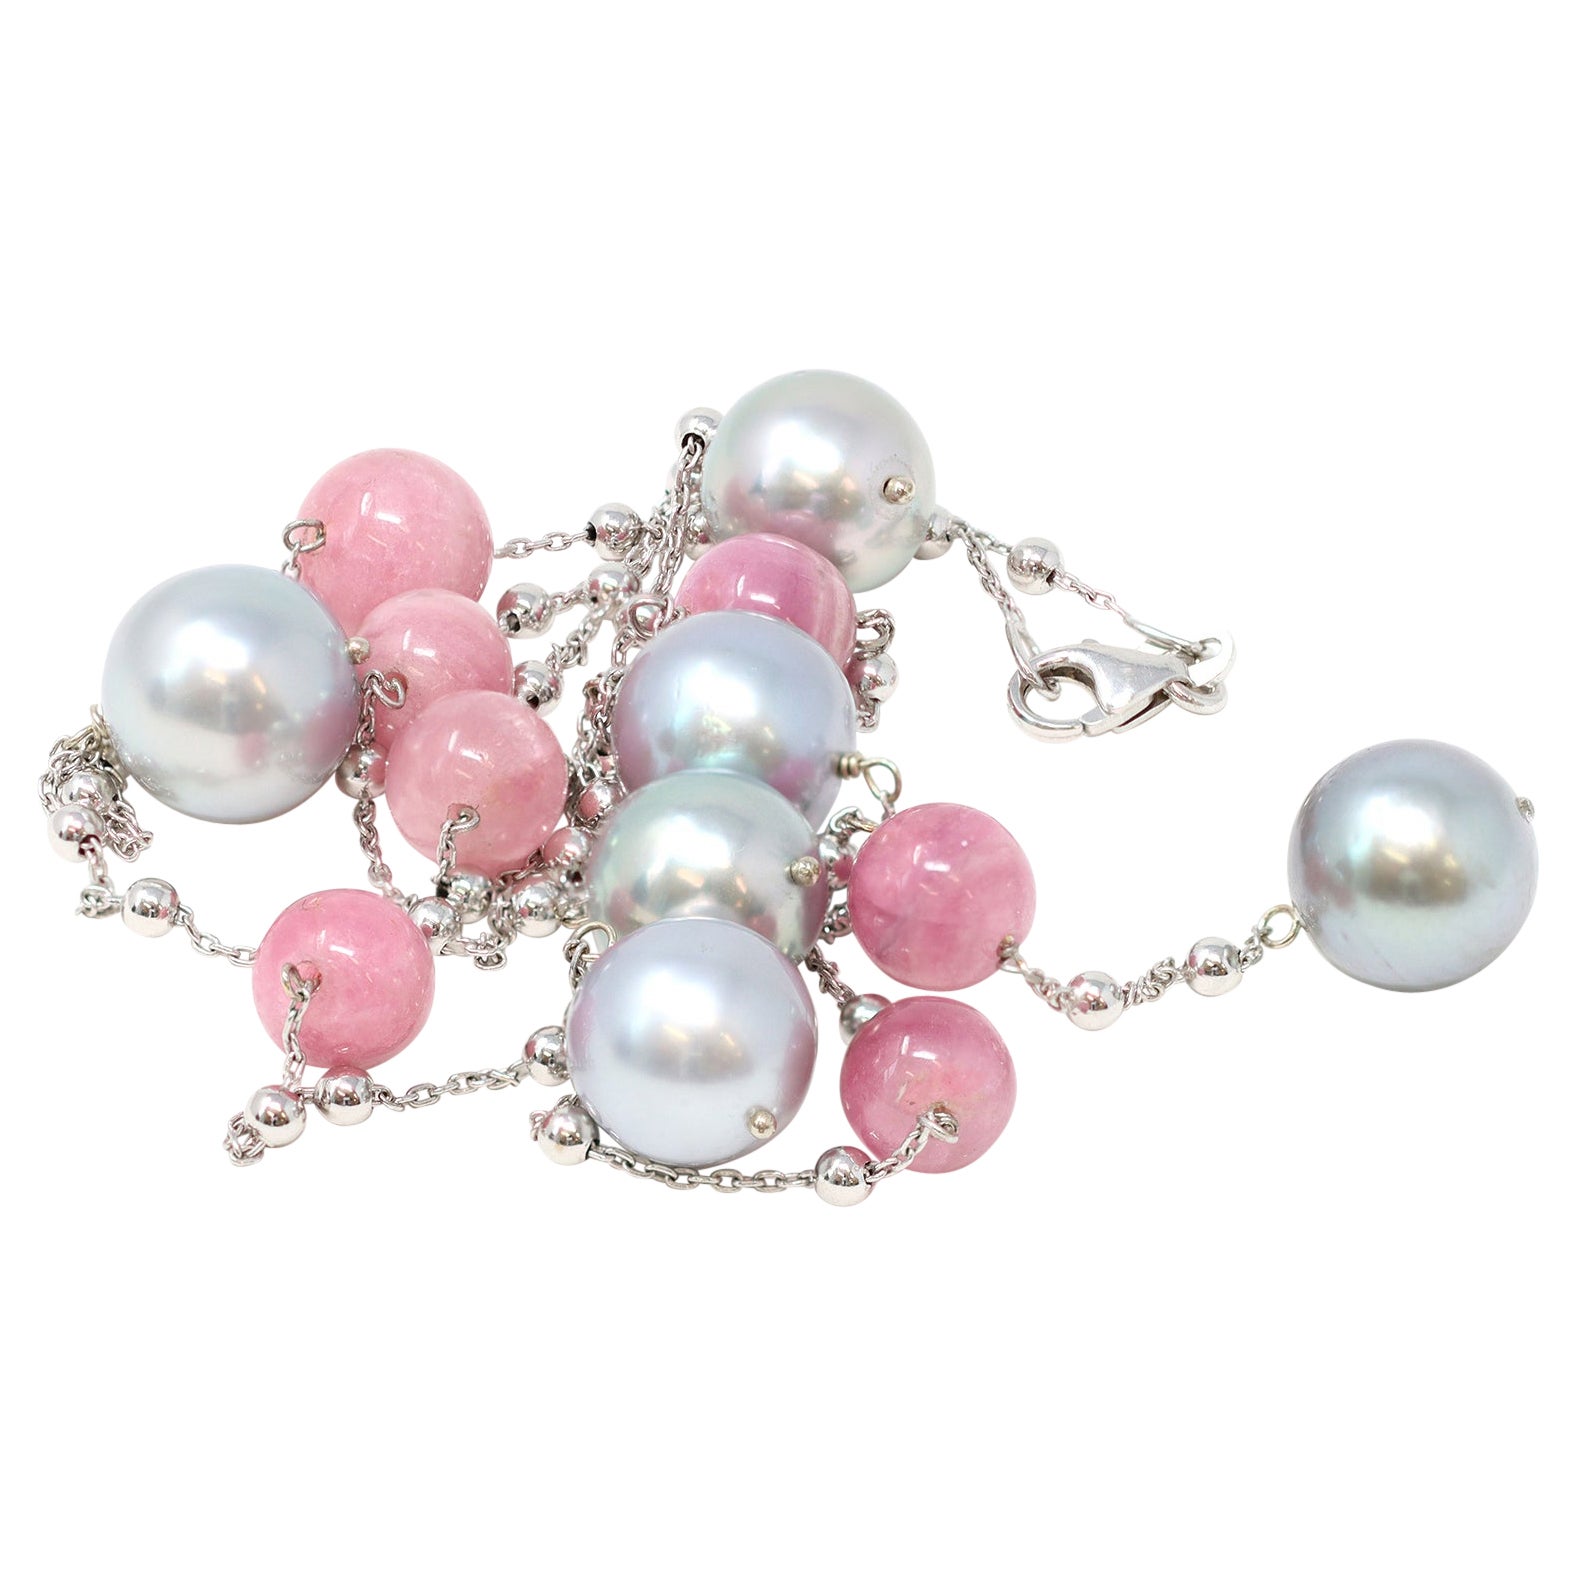 A dainty yet striking necklace by Rosaria Varra, featuring matched light silver Tahitian pearl round shape, and natural light pink tourmaline beads mounted as a station style necklace. The piece is set in 18 karat white gold with tiny gold beads and